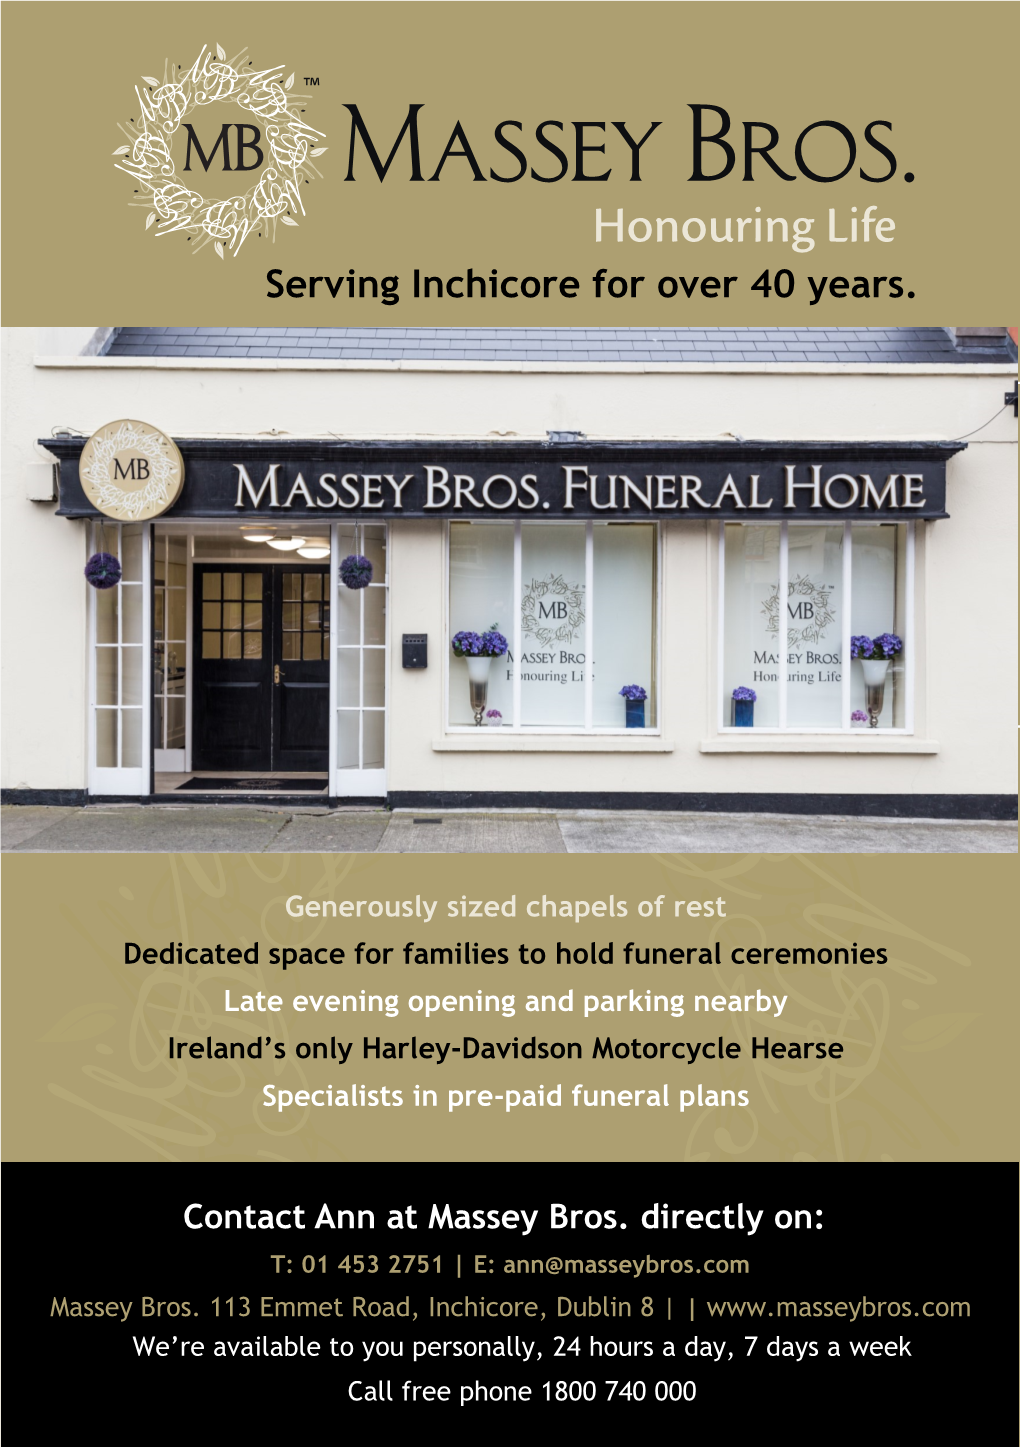 Serving Inchicore for Over 40 Years